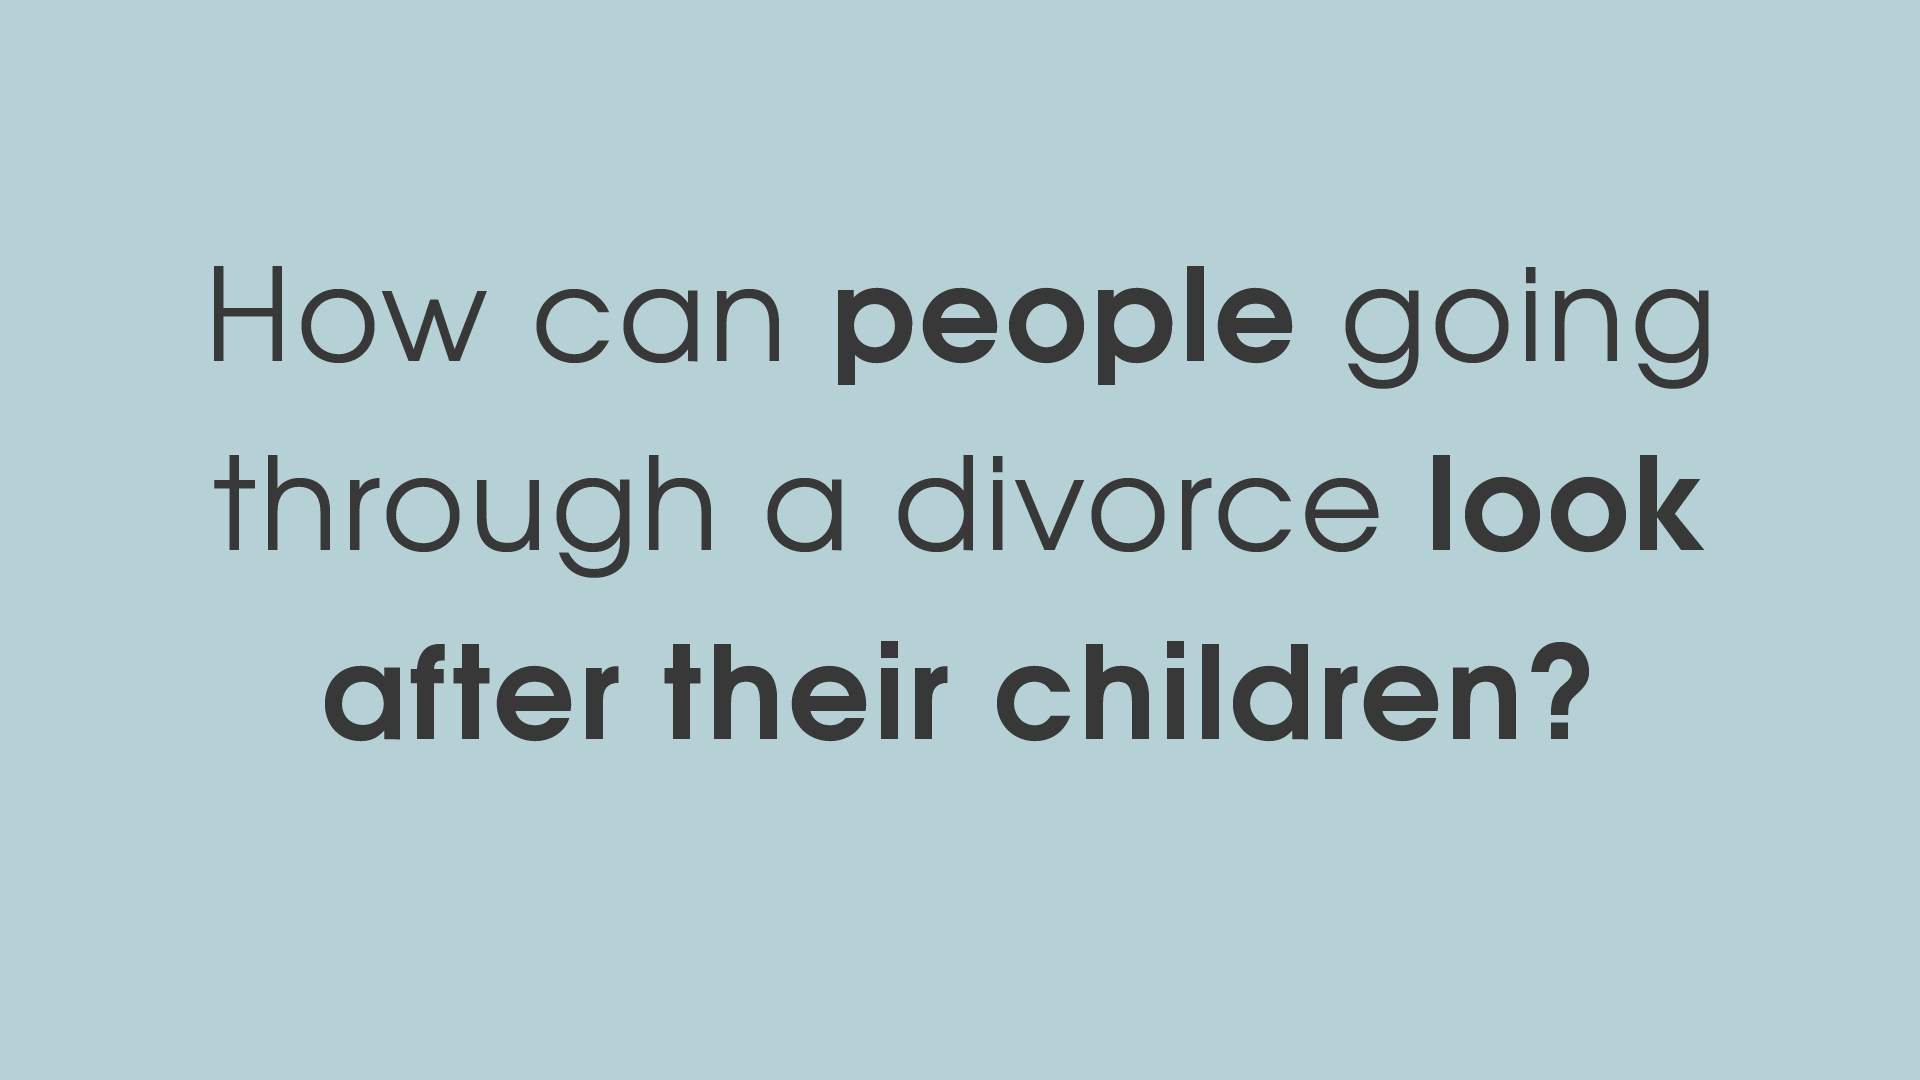 Family lawyer article video - How can people who are going through a divorce look after their children?